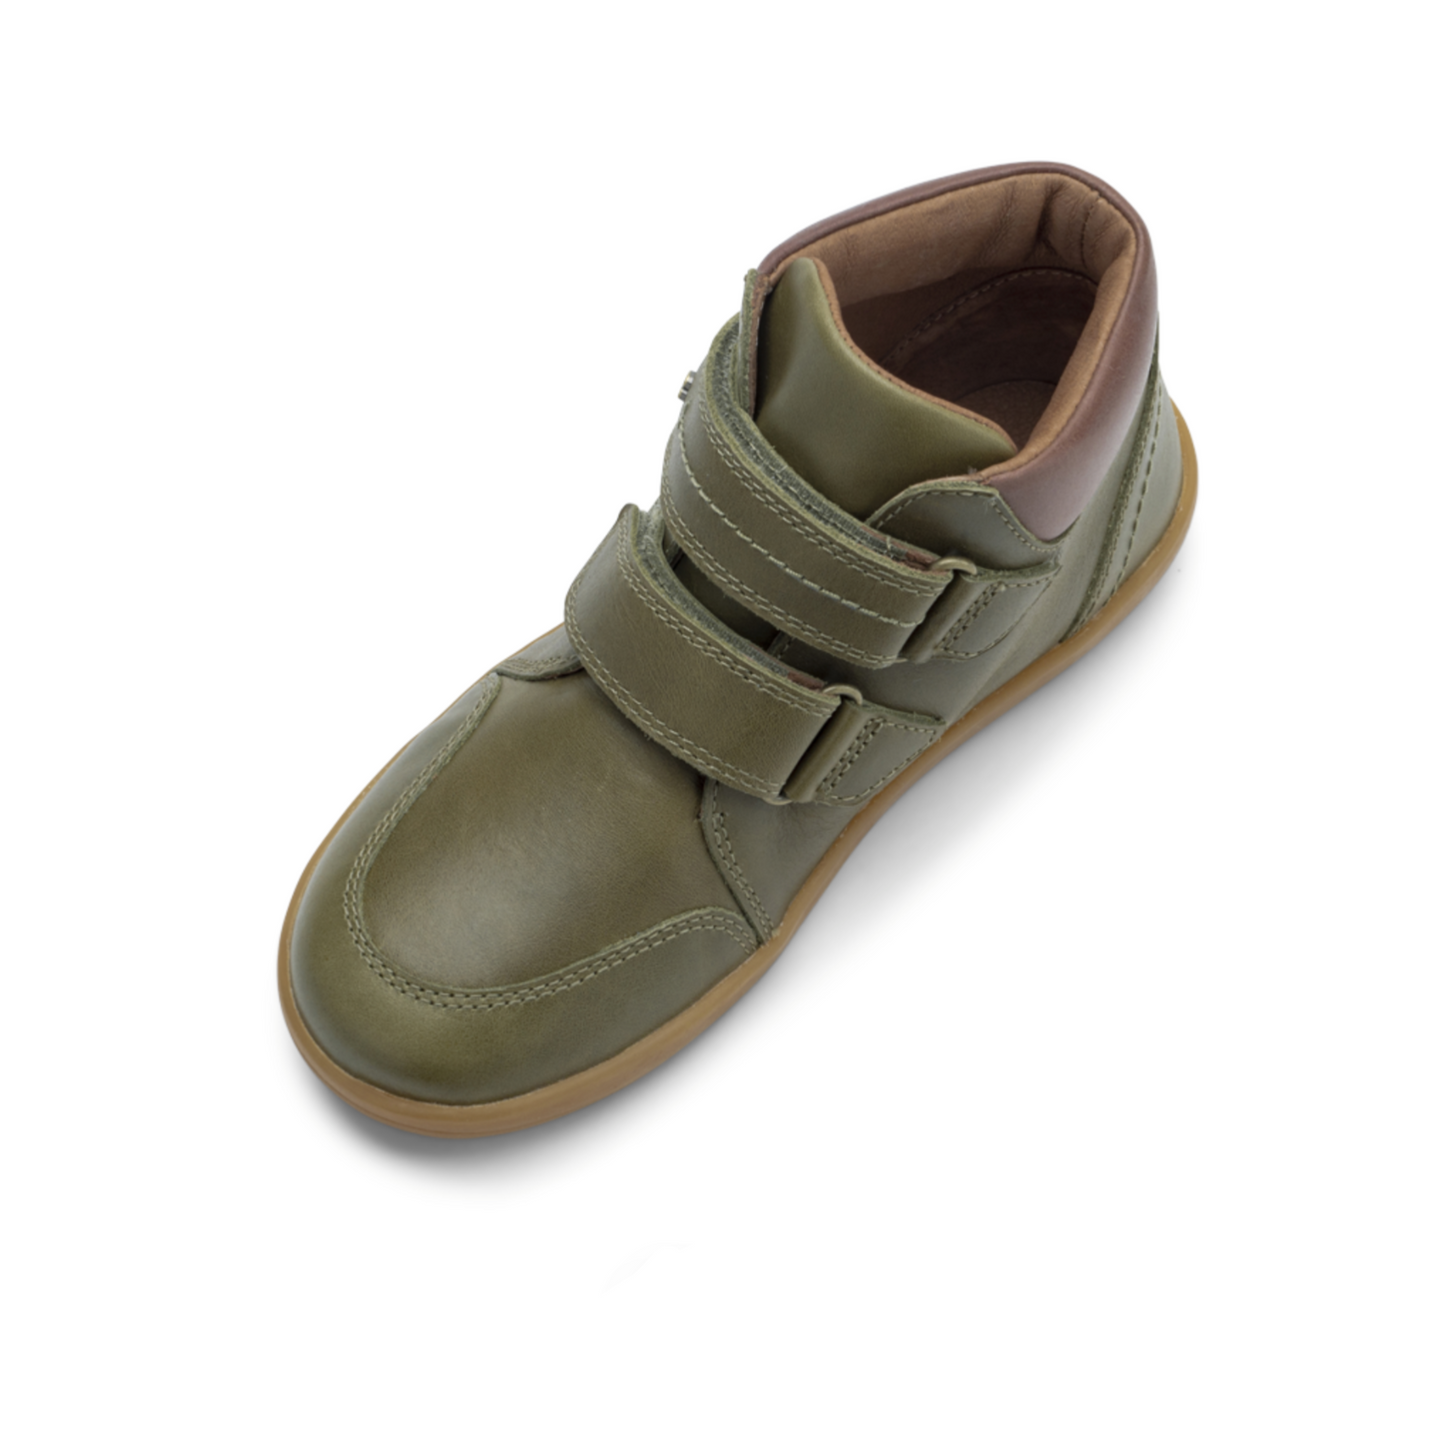 Bobux Timber Olive Boots